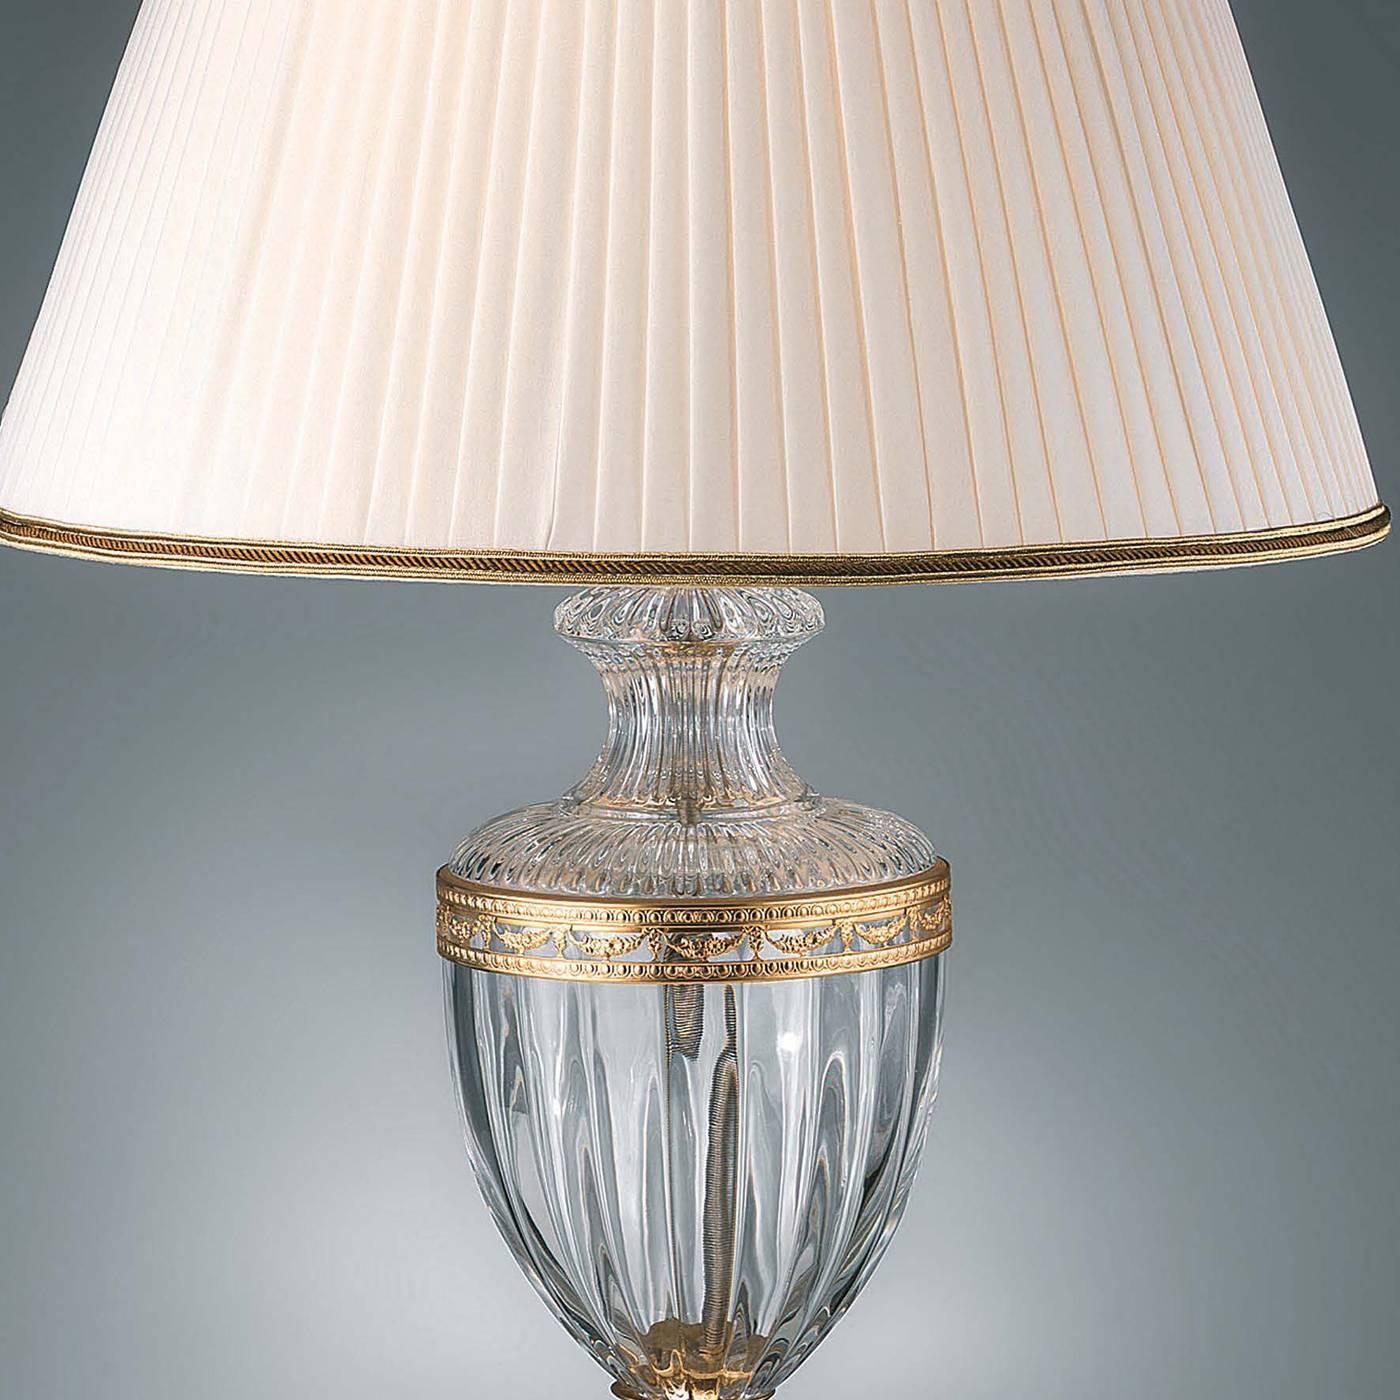 This lamp meant for the top of a dresser will add a touch of luxury to any home. The clear crystal body of the lamp is adorned with accents and a base in 24-karat gold plated brass. The elegant white lampshade has piping in its bottom and top in